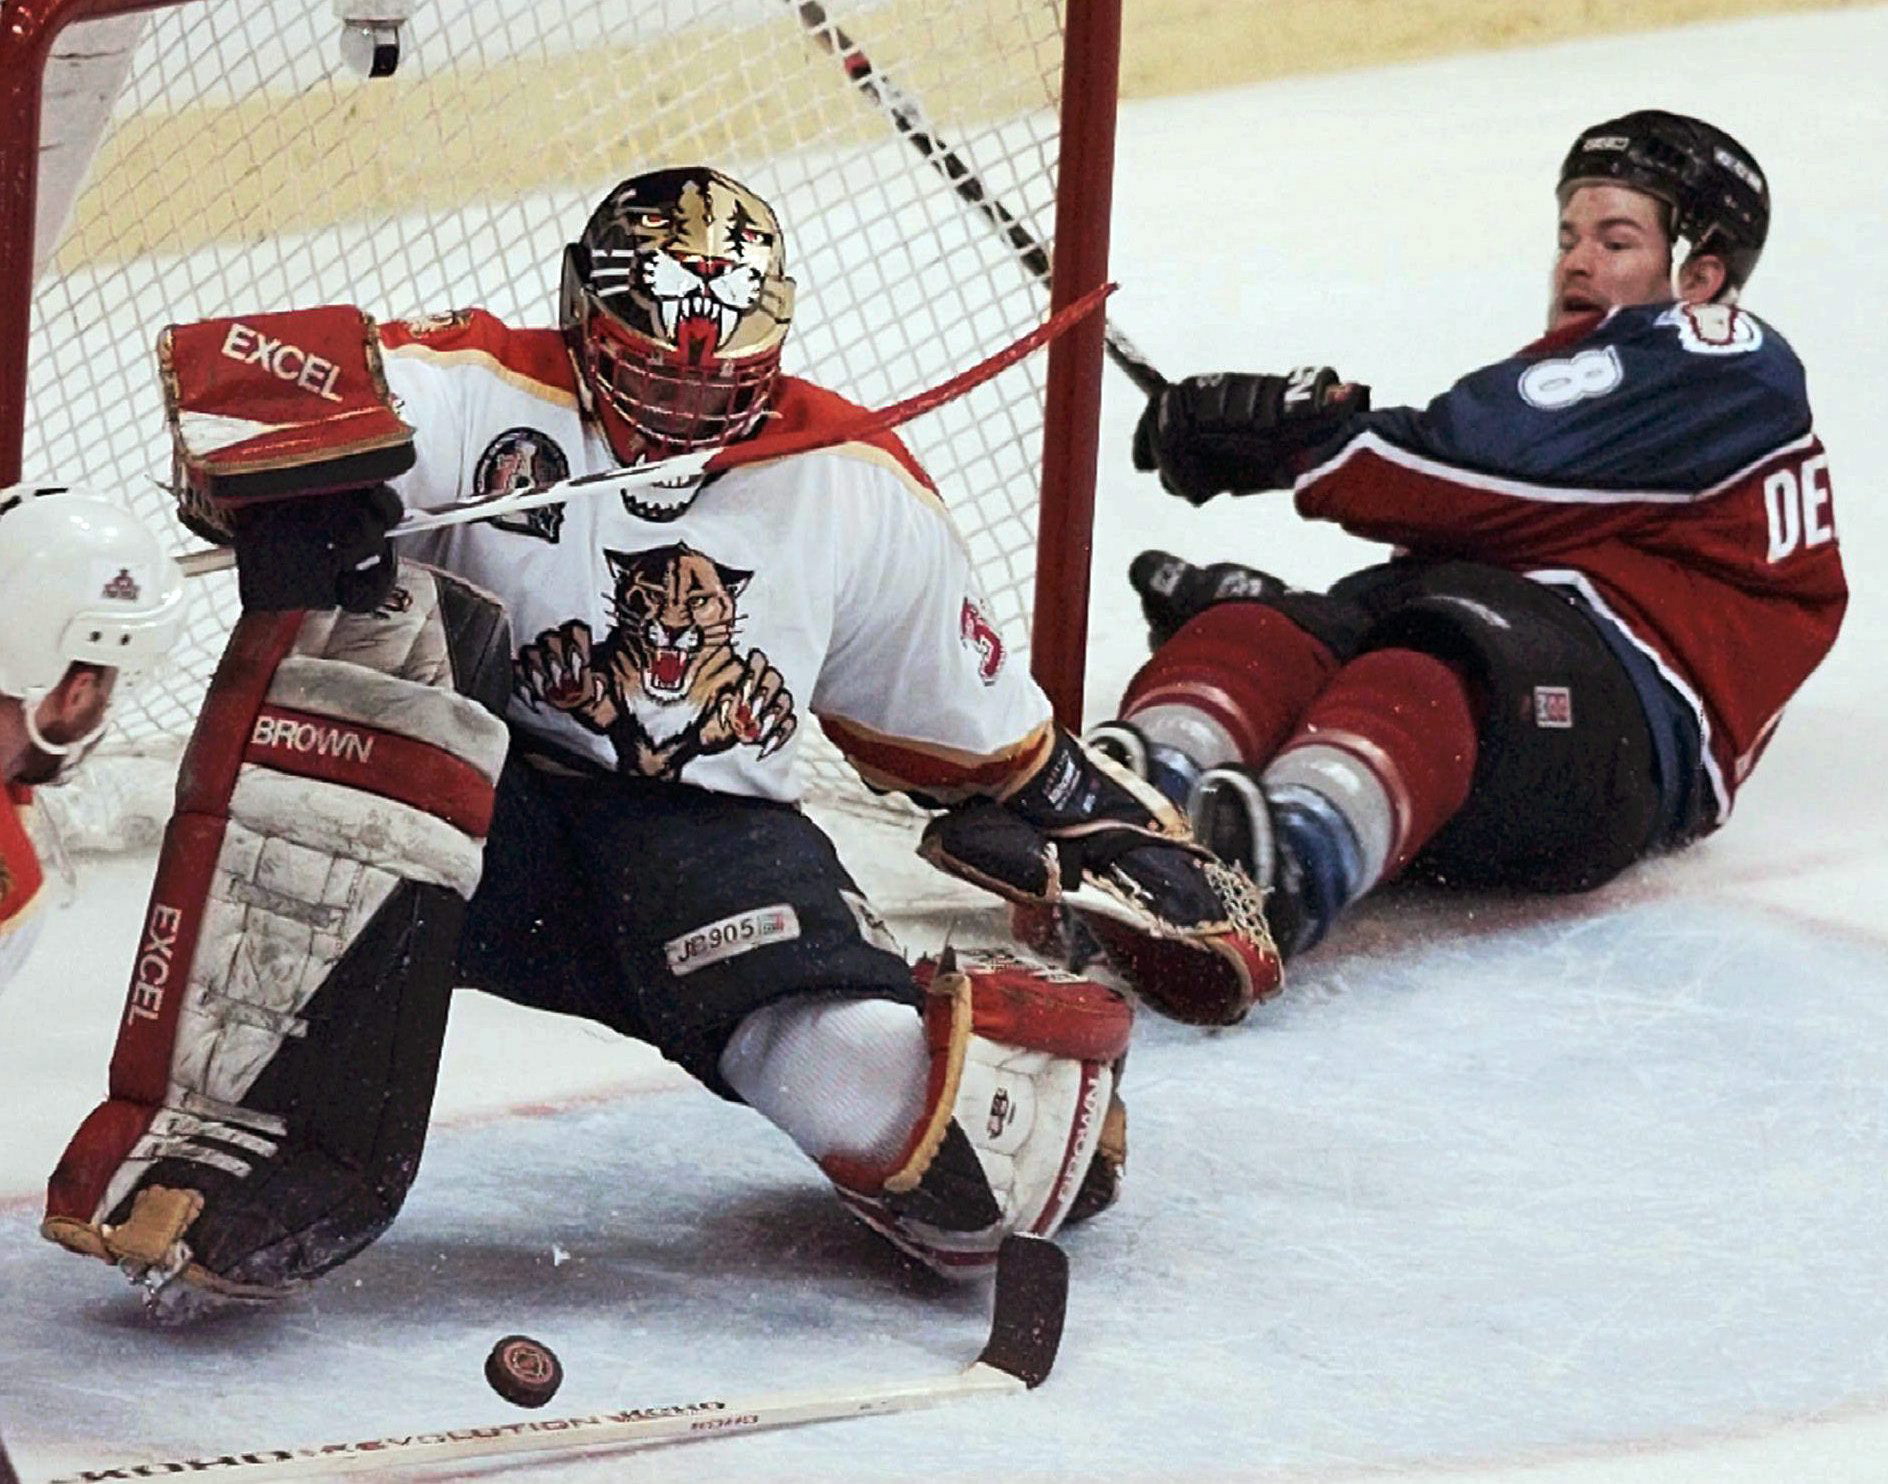 (XMH 202) MIAMI, June 10--Florida Panthers goaltender John Vanbiesbrouck makes the save as Colorado Avalanche Adam Deadmarsh slides into the net during first period of Game 4 Stanley Cup Finals Monday in Miami. (CP PHOTO) 1996 (stf/Paul Chiasson)